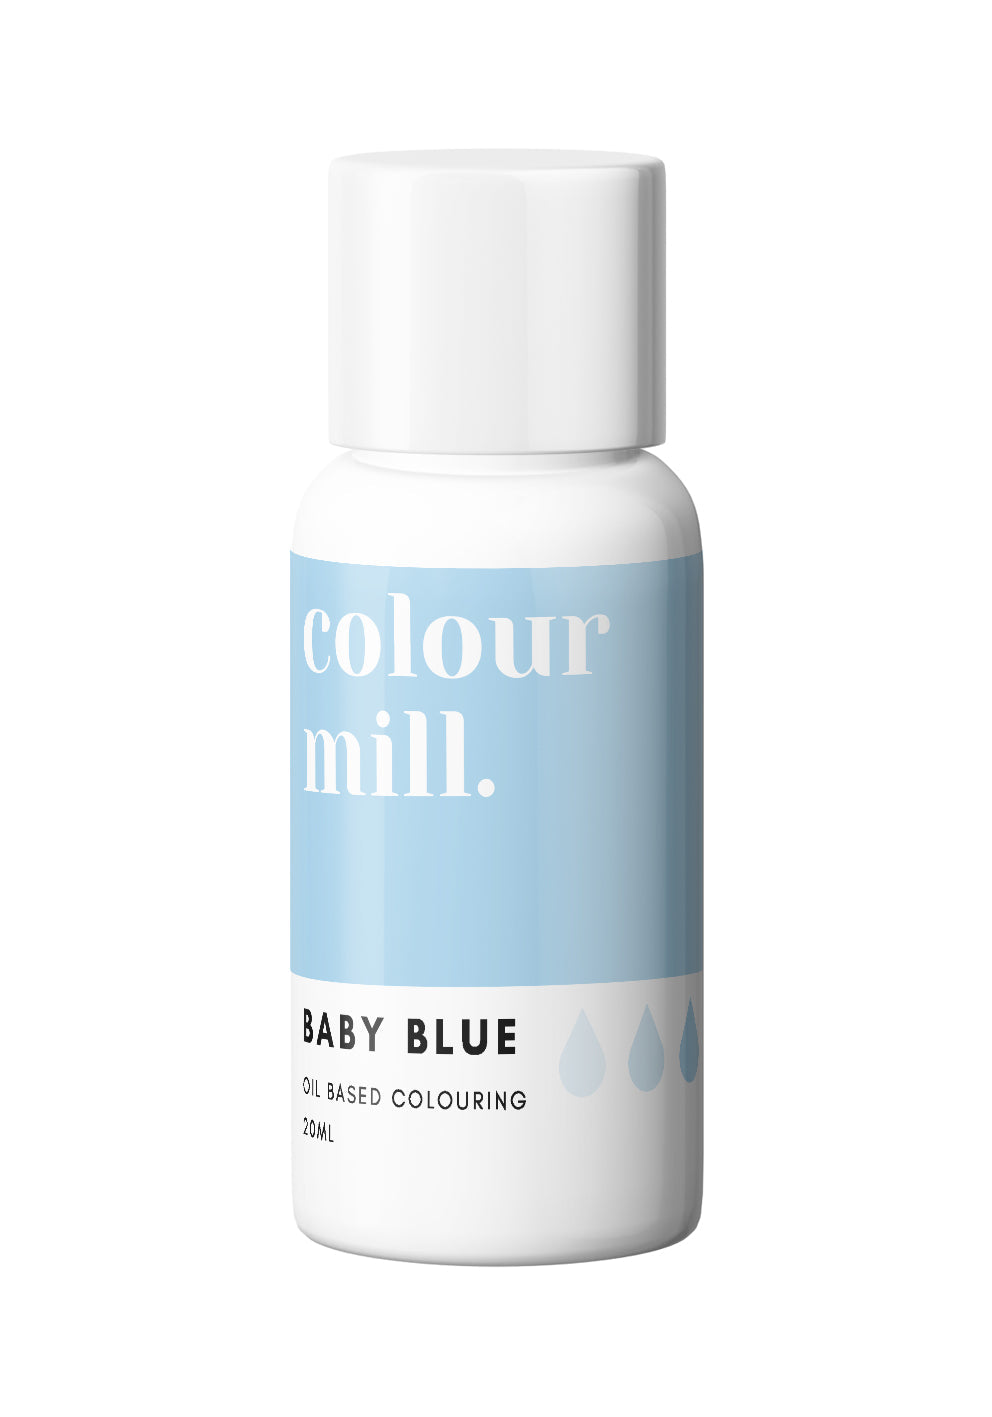 Colour Mill Oil Based Colouring 20ml